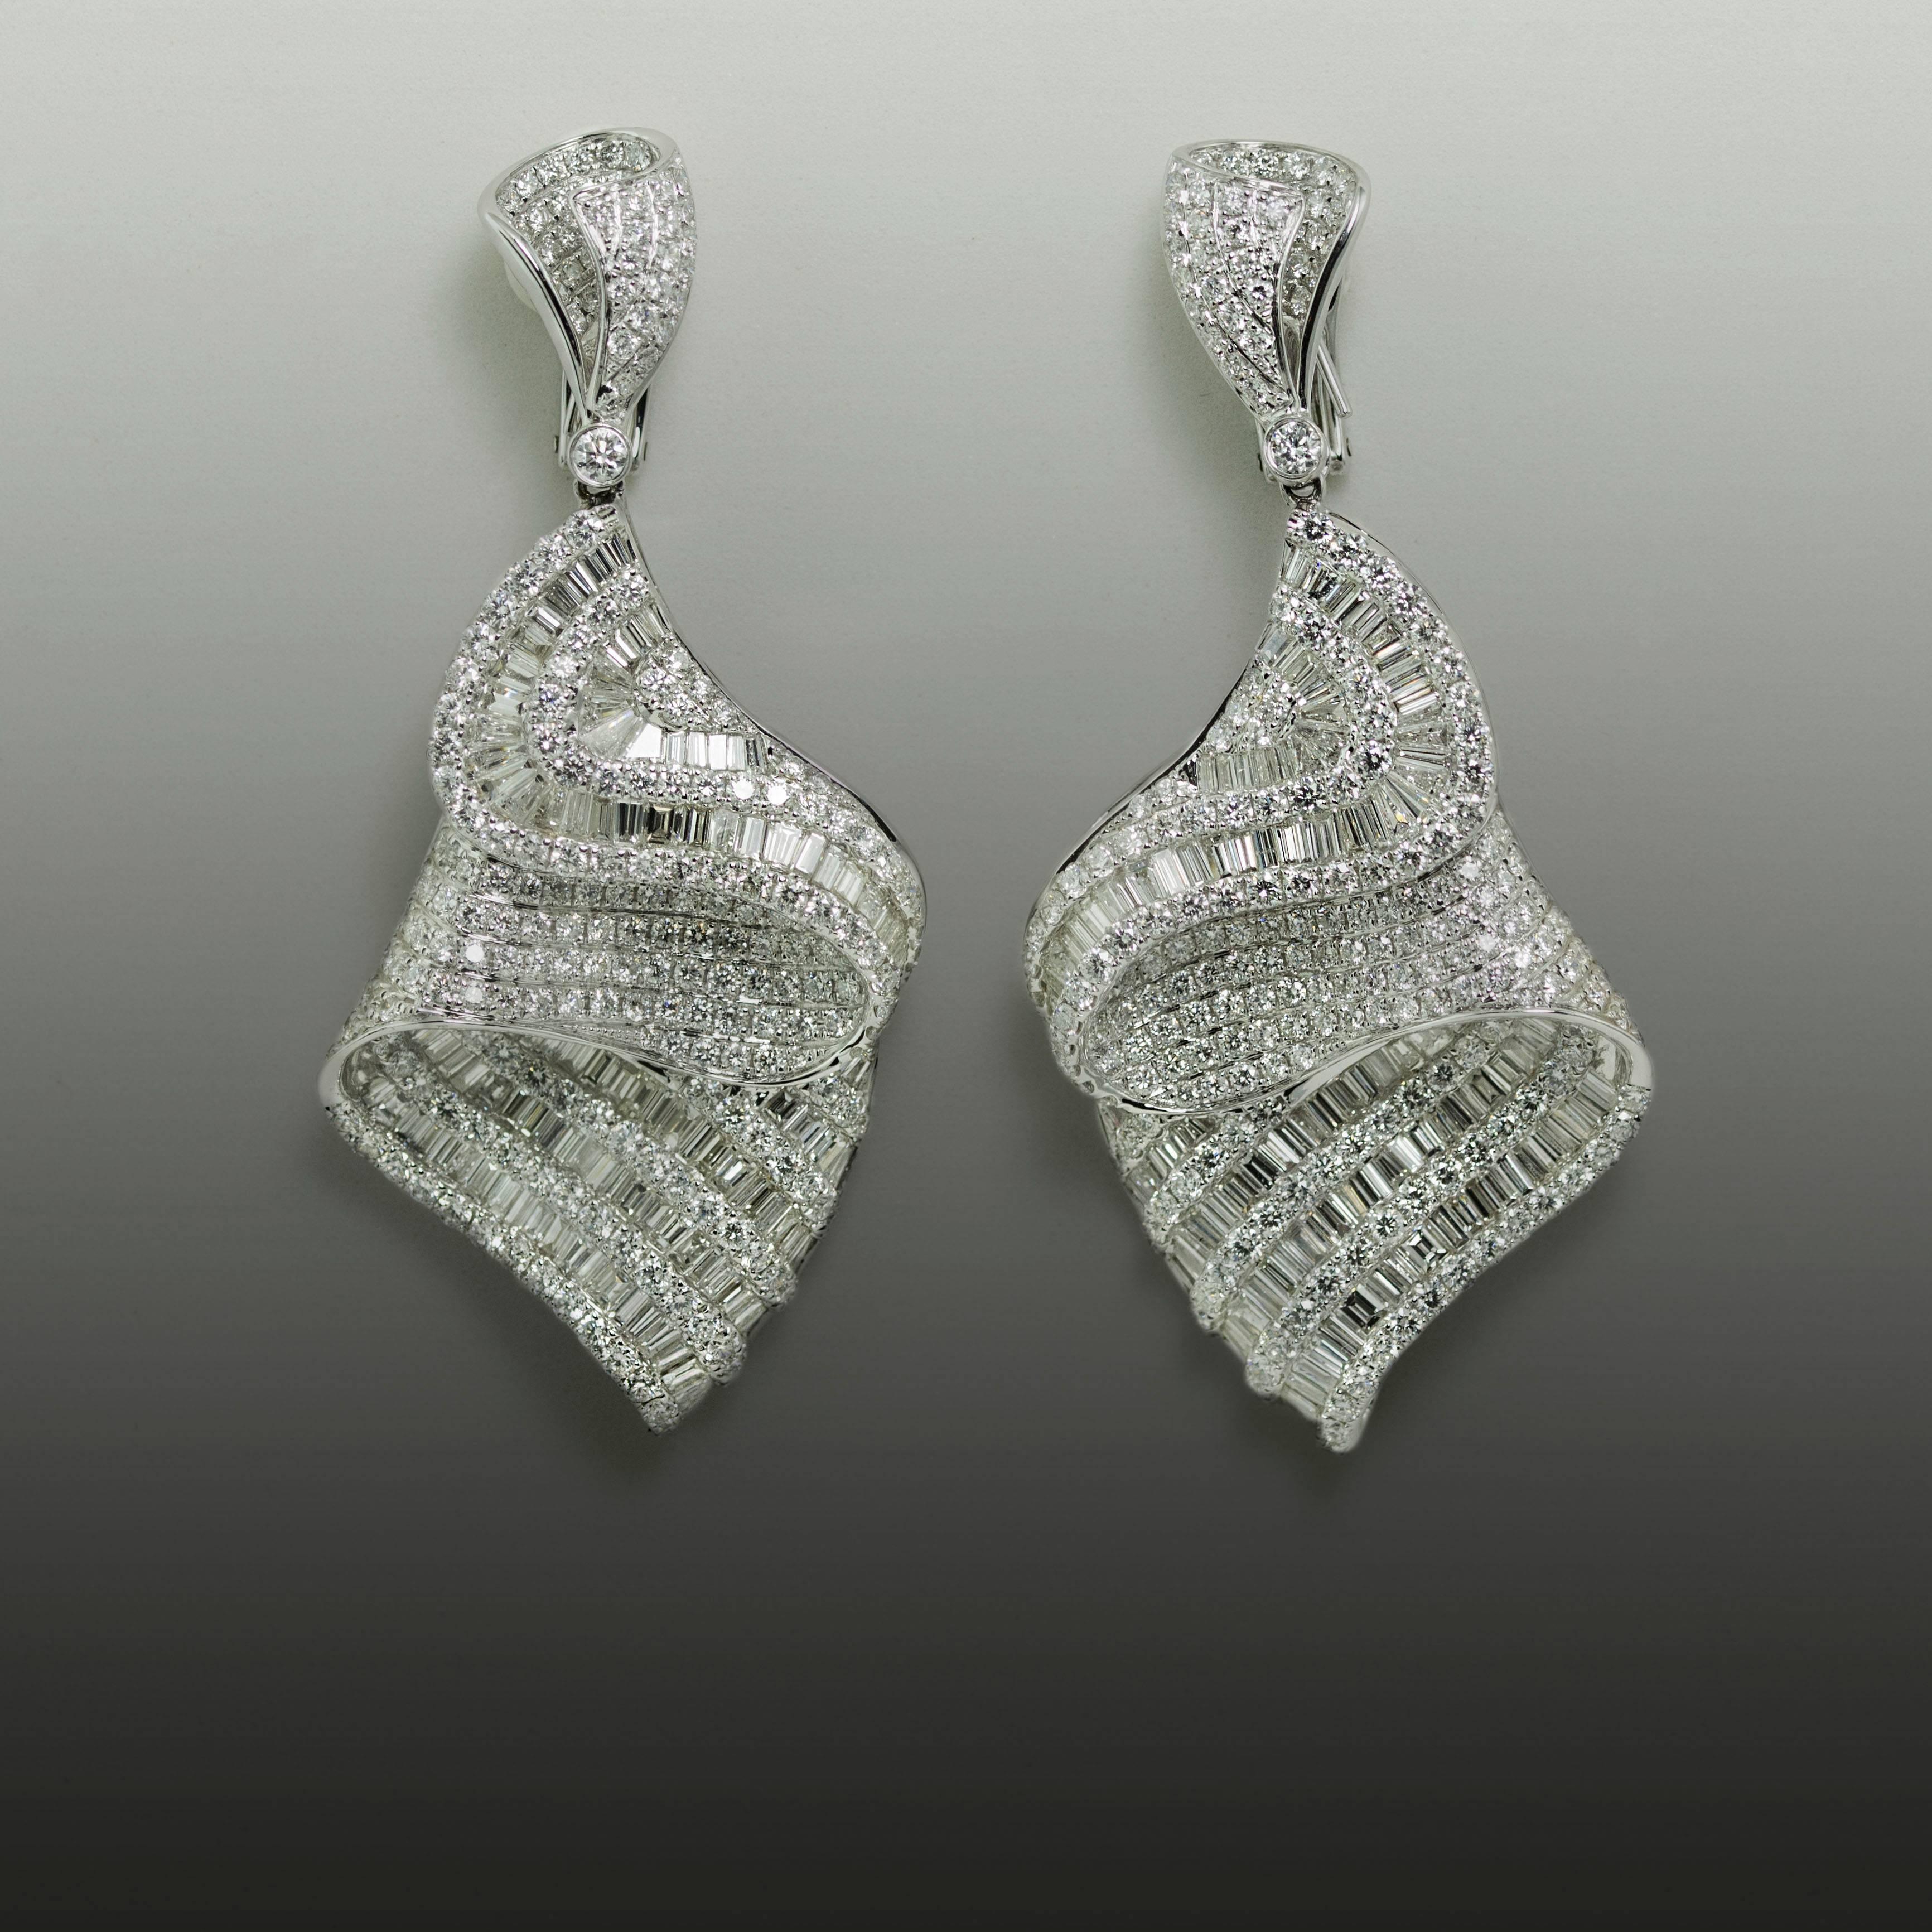 Academy Award Style 18k white gold chandelier earrings with 17.83 carats of F-G color VS+ clarity baguette cut and round brilliant diamonds.